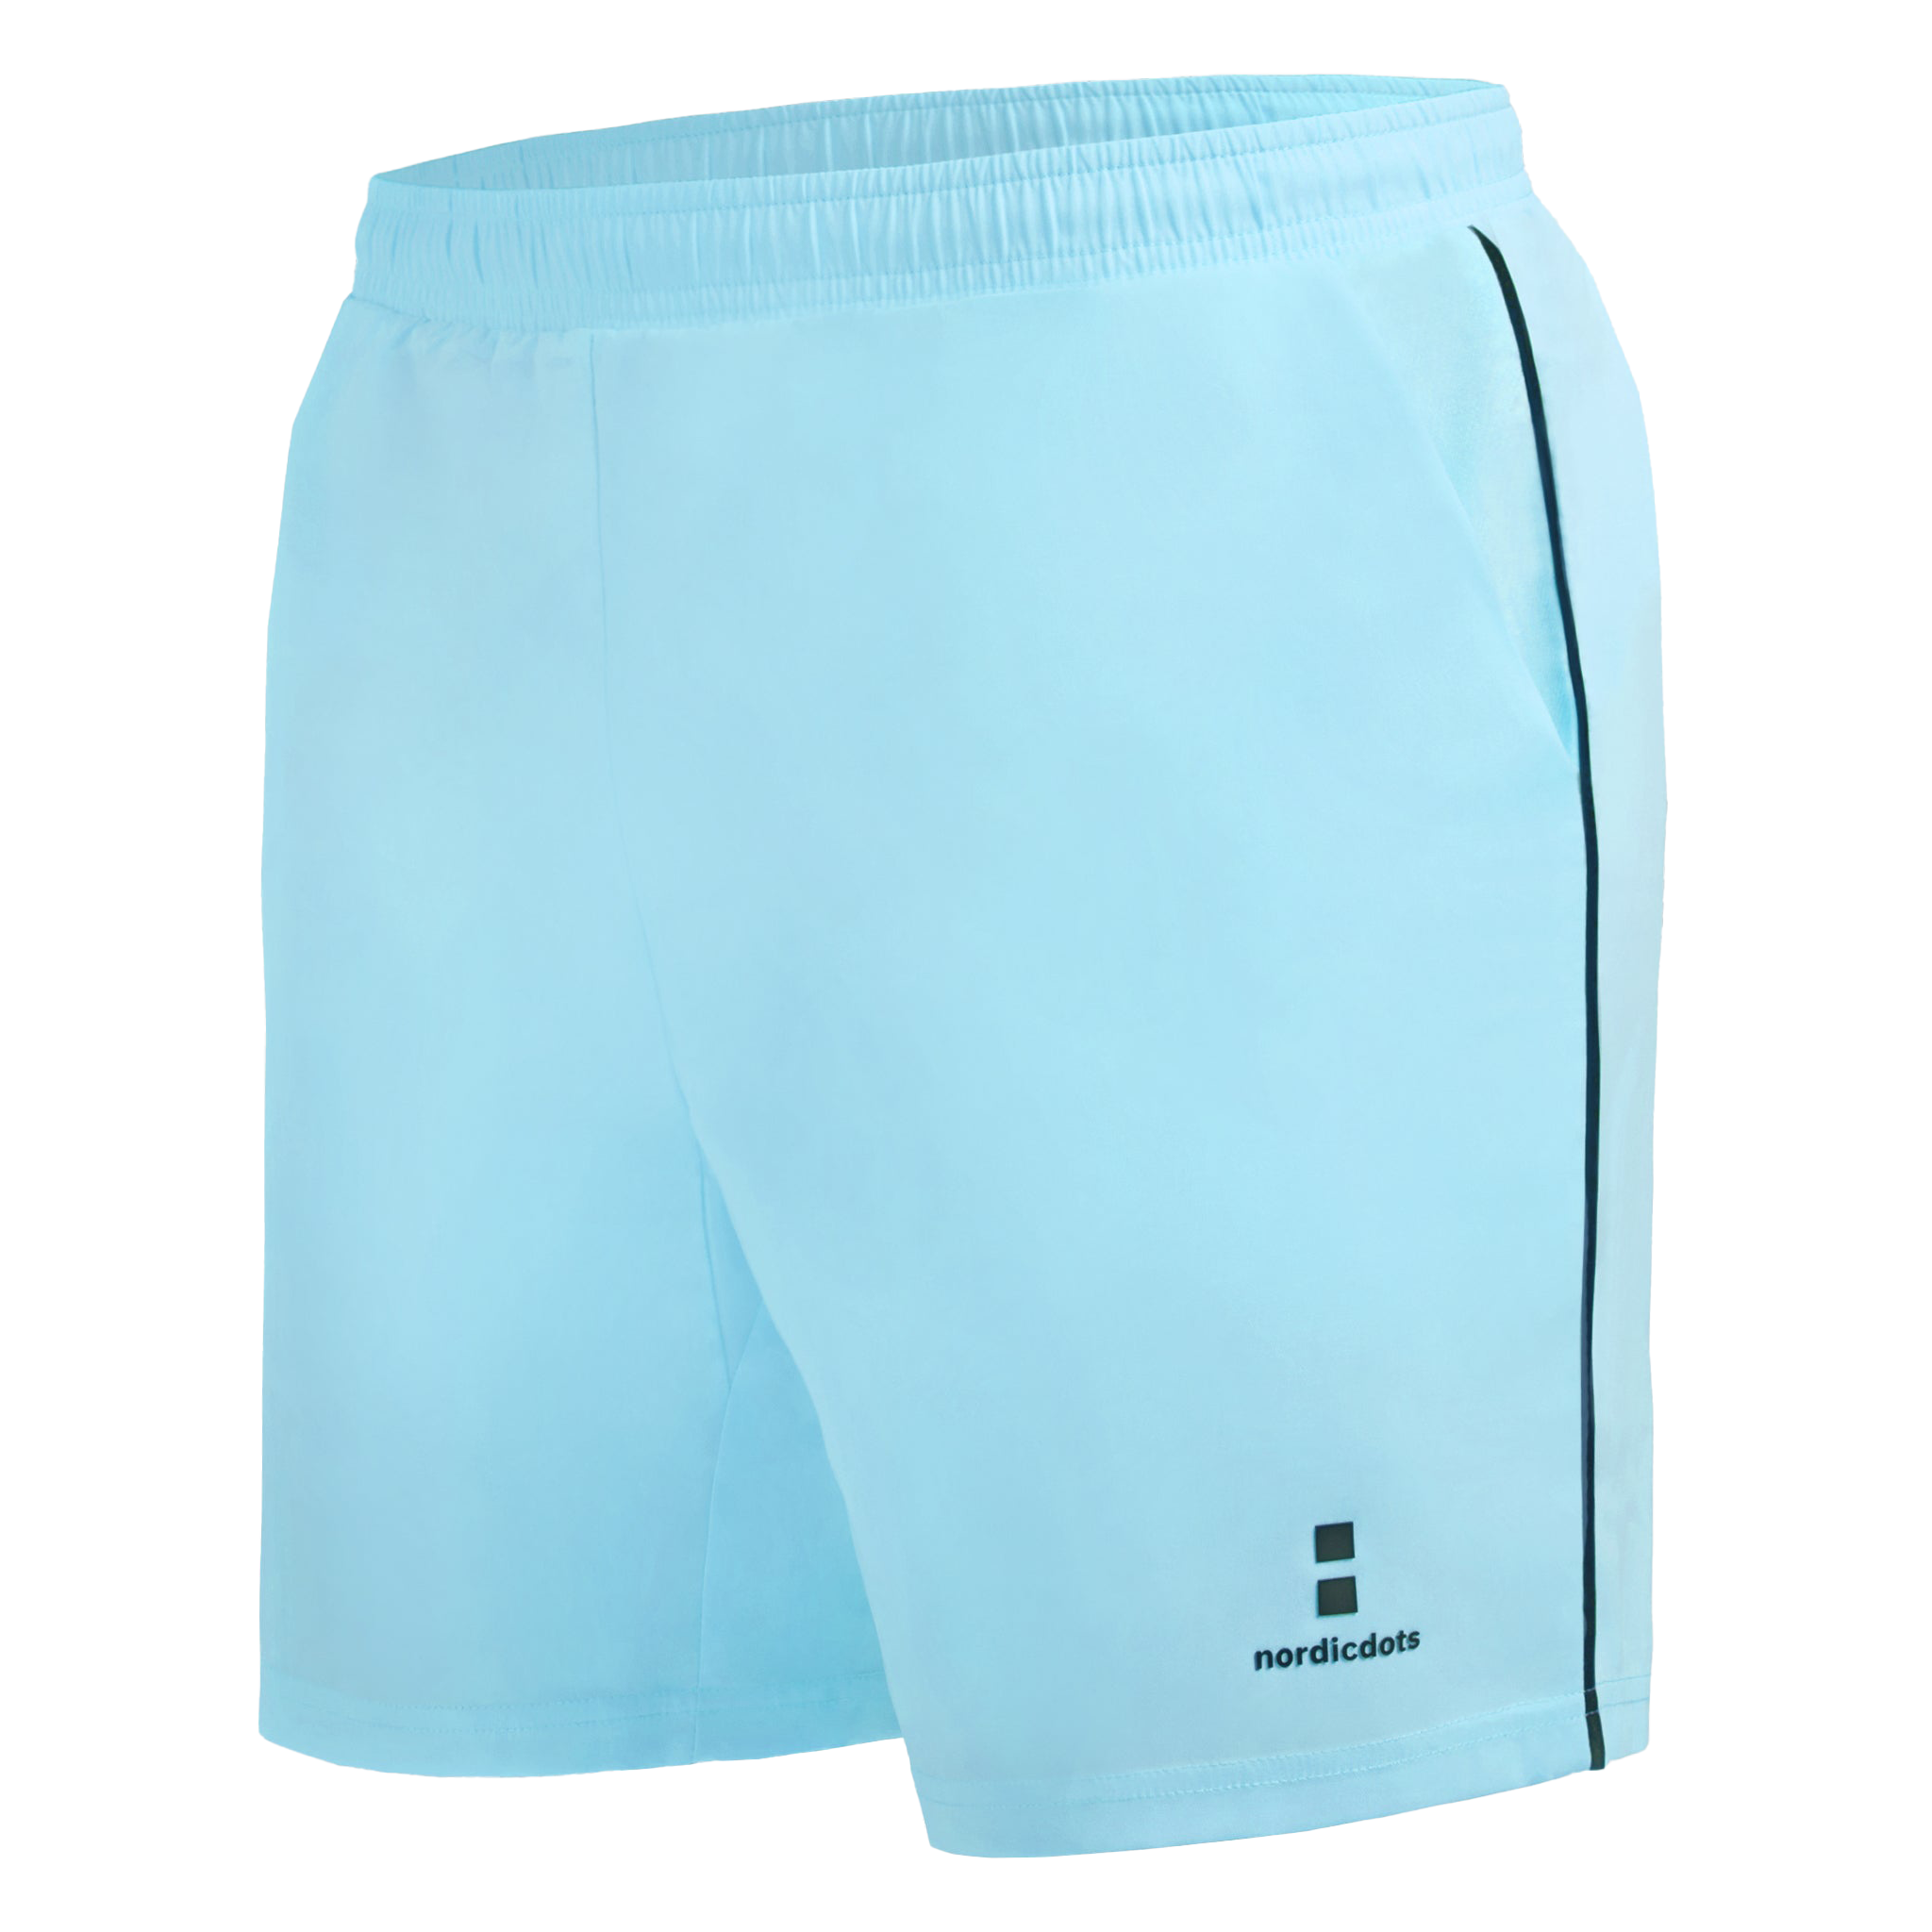 nordicdots Performance Shorts Cooling Blue